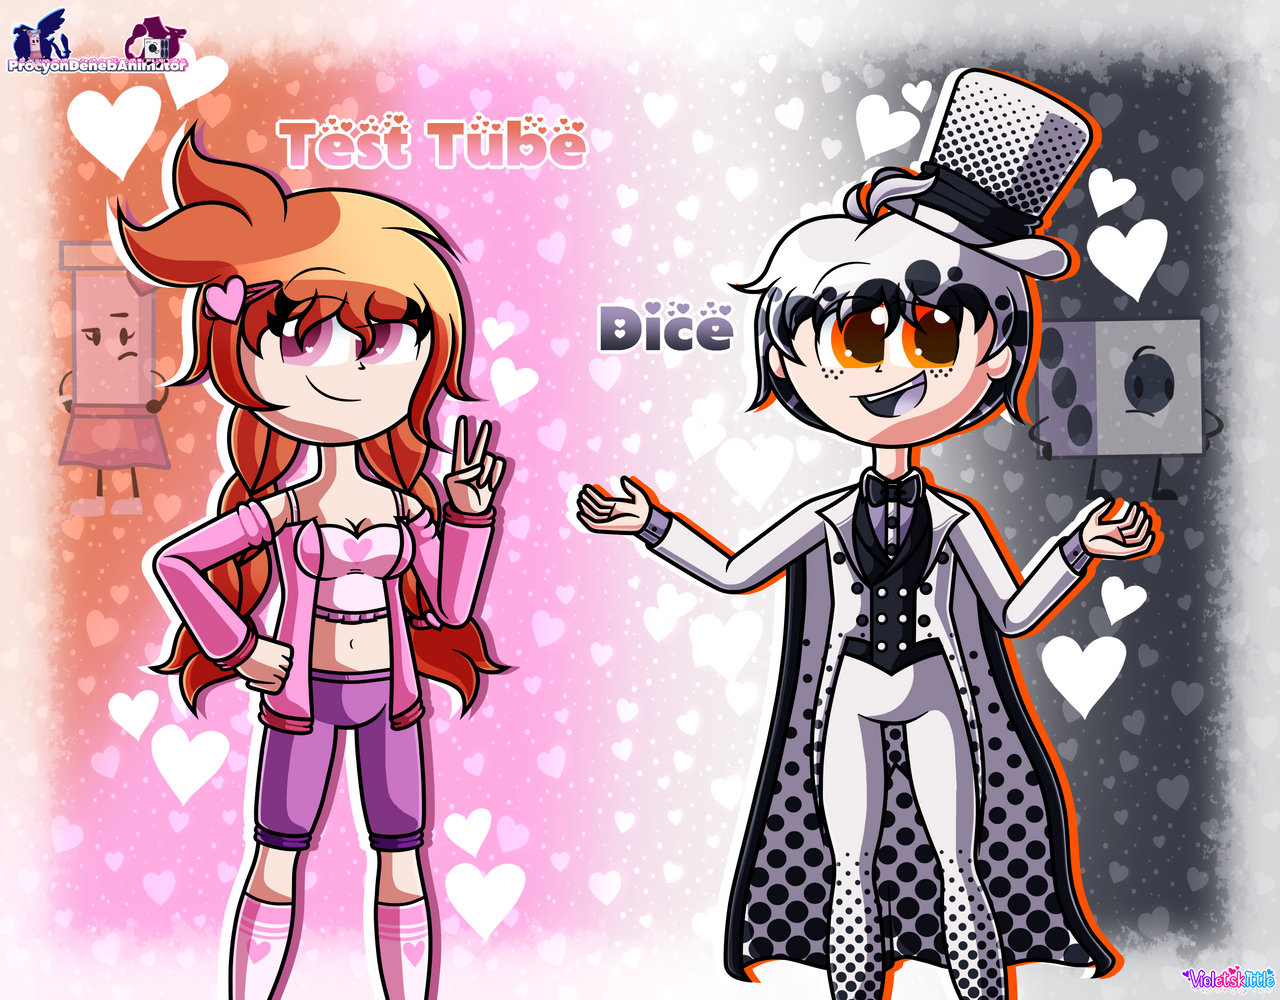 Double Down Characters in Gacha Club (16-20) by Violetskittle on DeviantArt